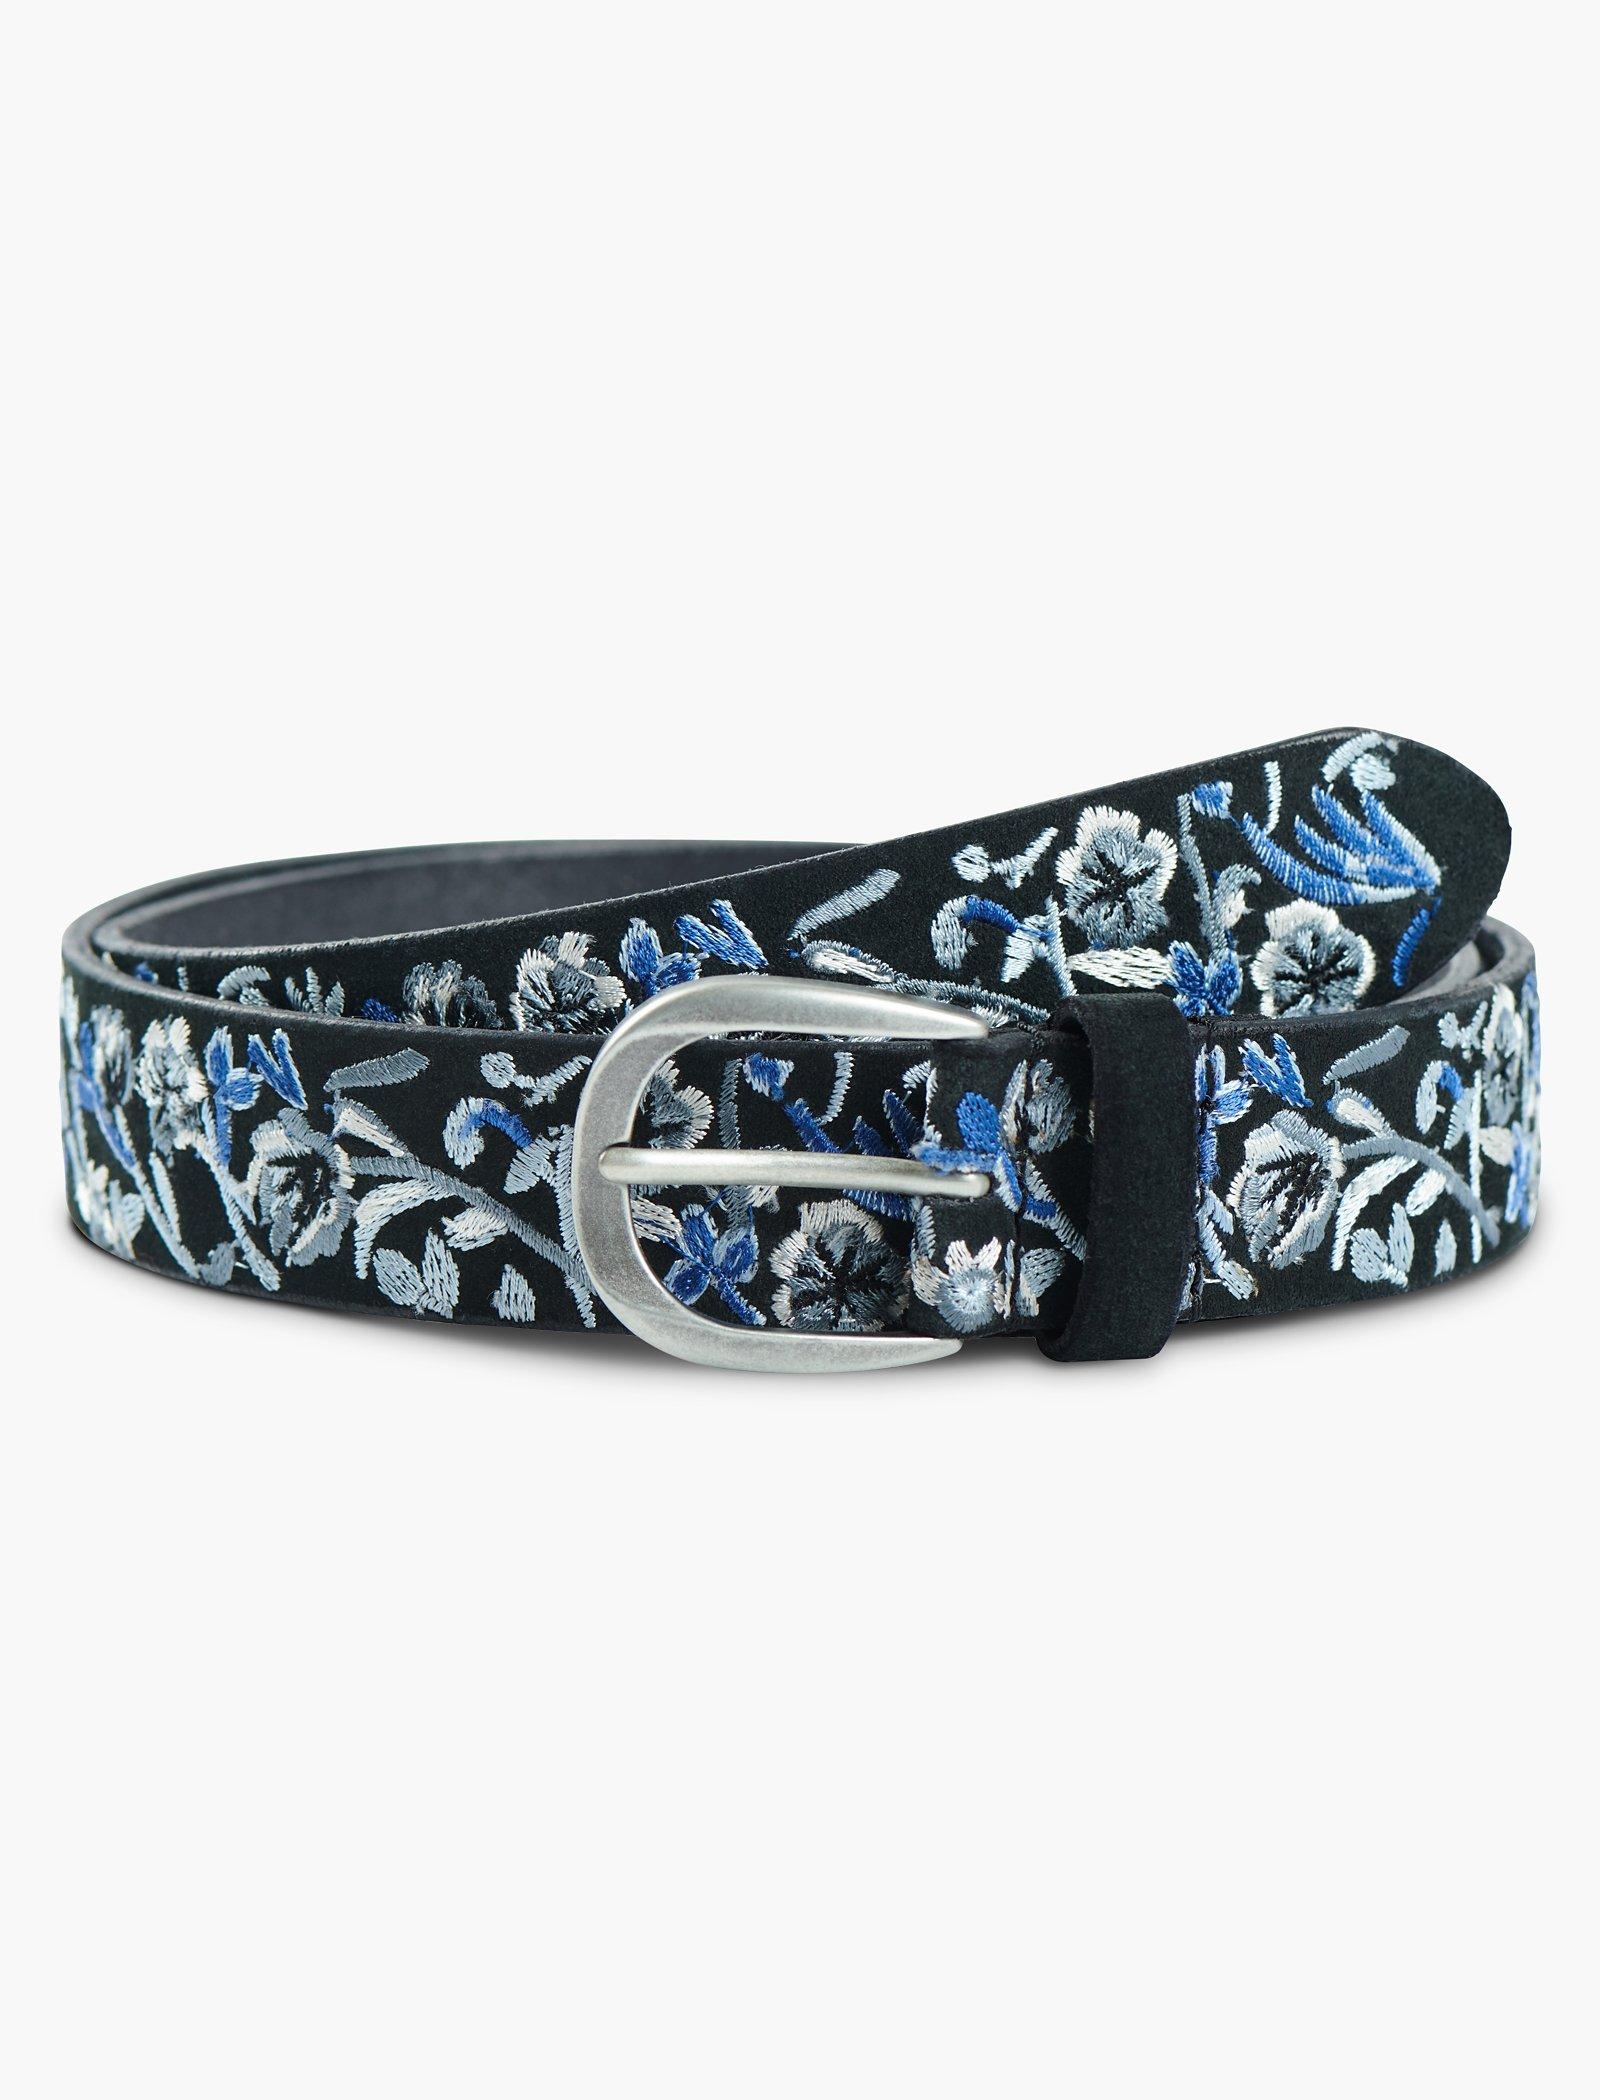 SPRIGGED FLORAL EMBROIDERED BELT | Lucky Brand